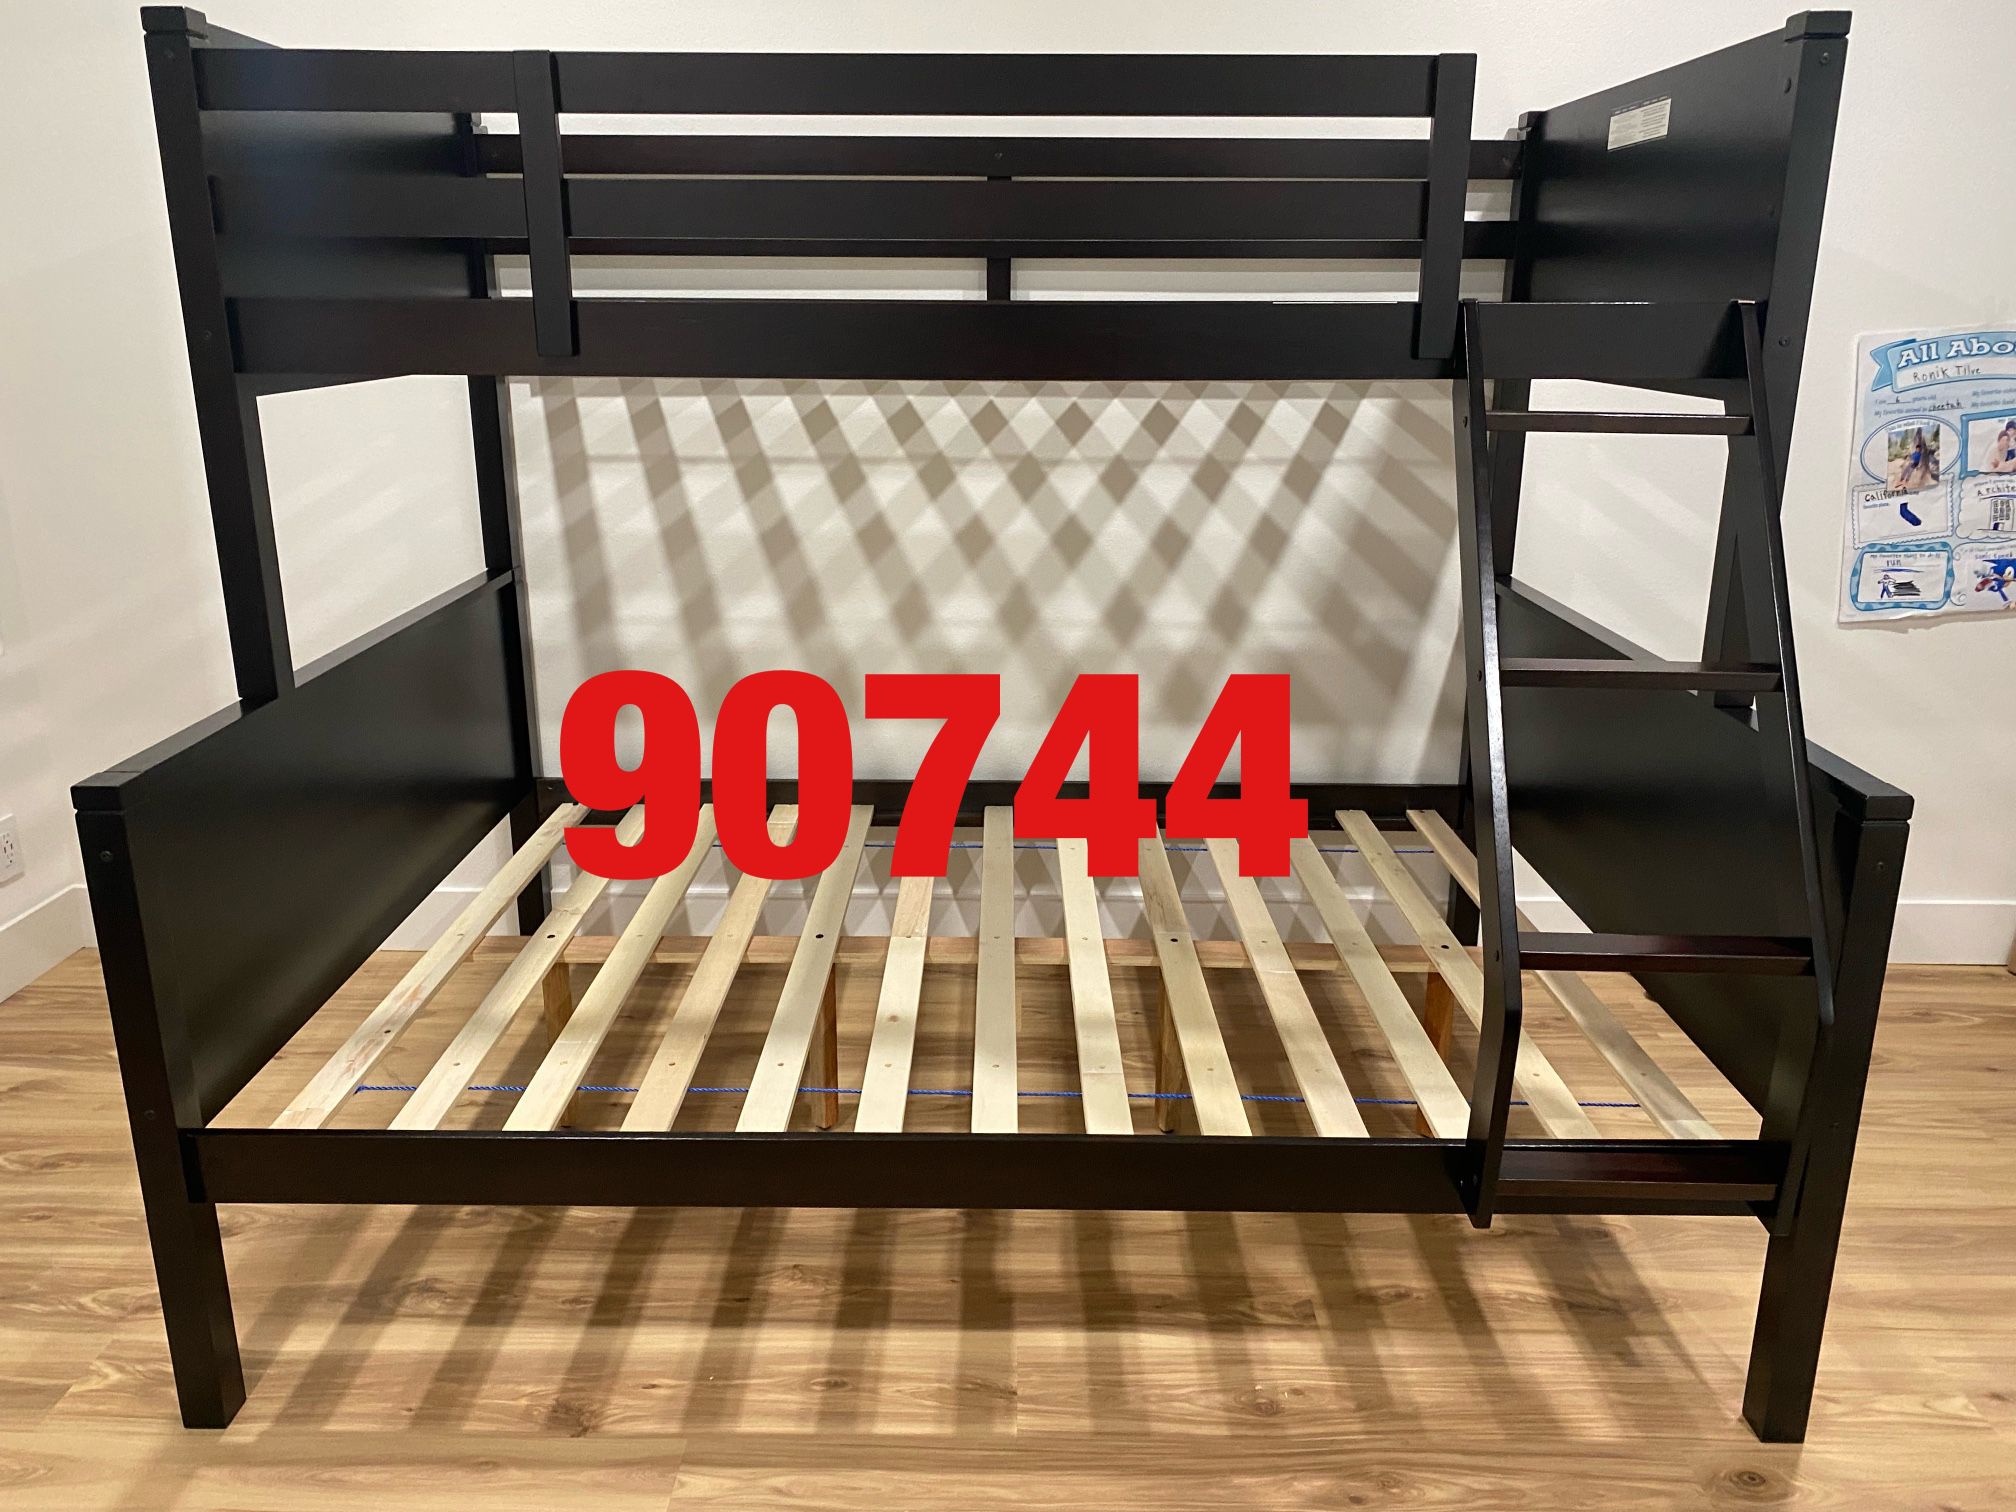  Espresso twin over full bunk bed. Assembly required. Assembly not included. Free delivery-$450.00 Colors: espresso & white. Assembly is an extra -$15